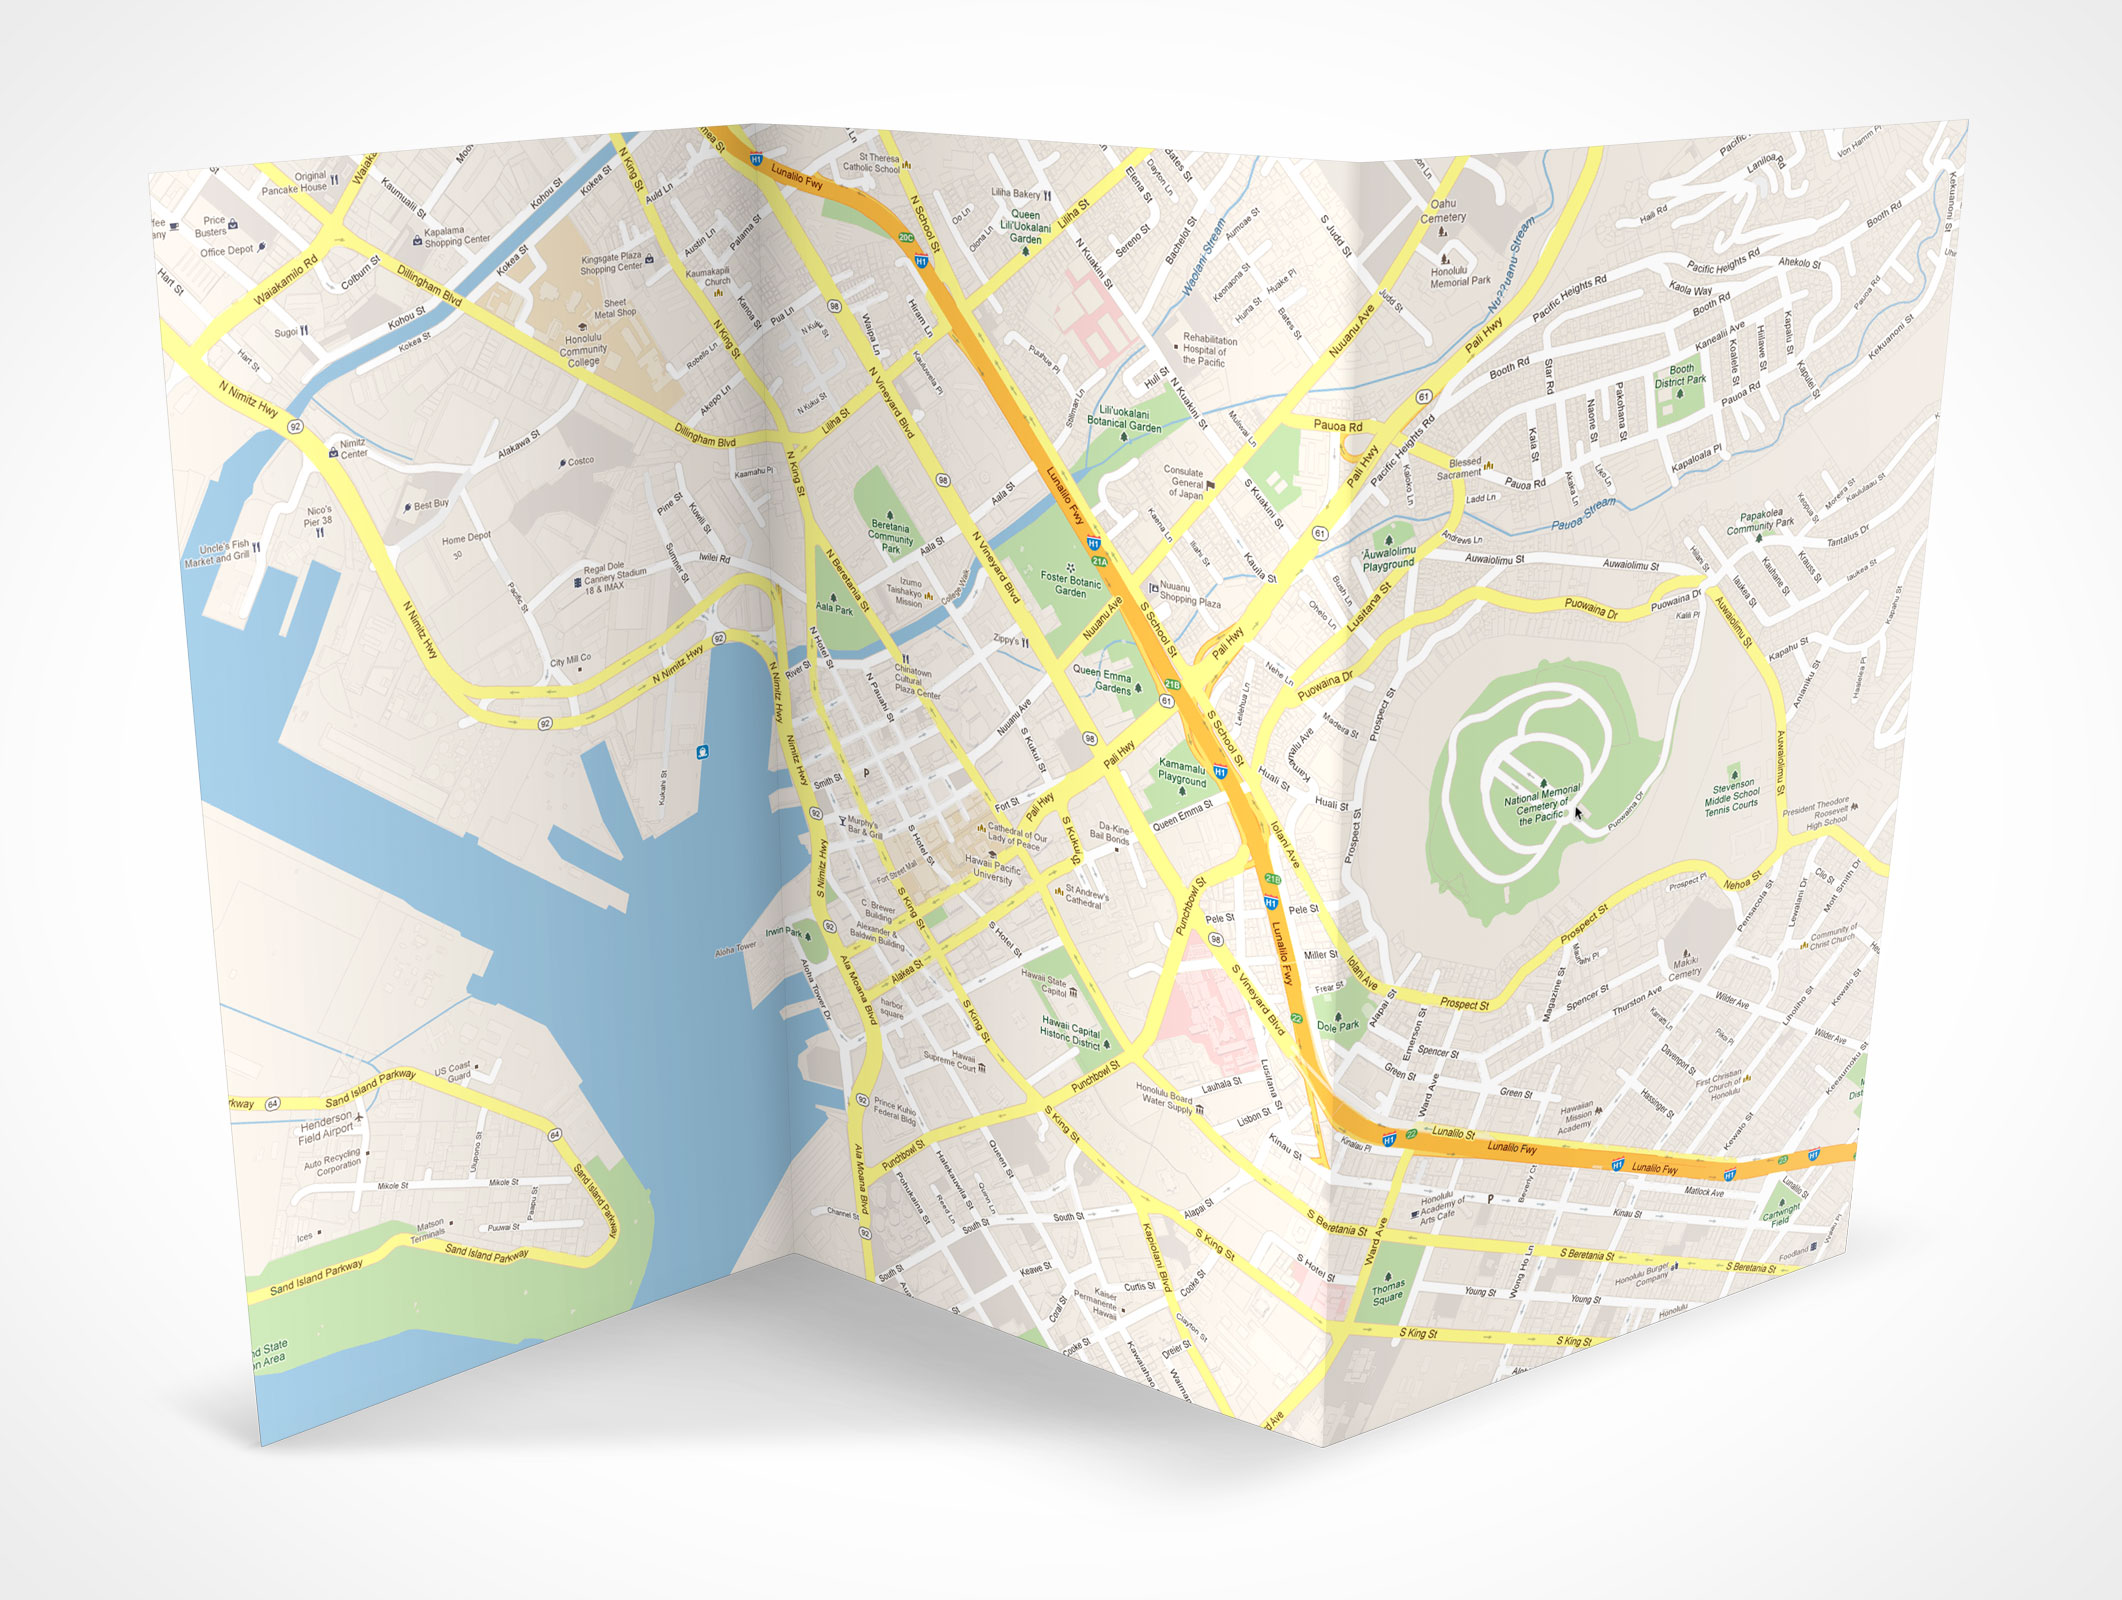 Download Map Mockup Free / 3d Google Map Mock Up By Robbiewilliams ...